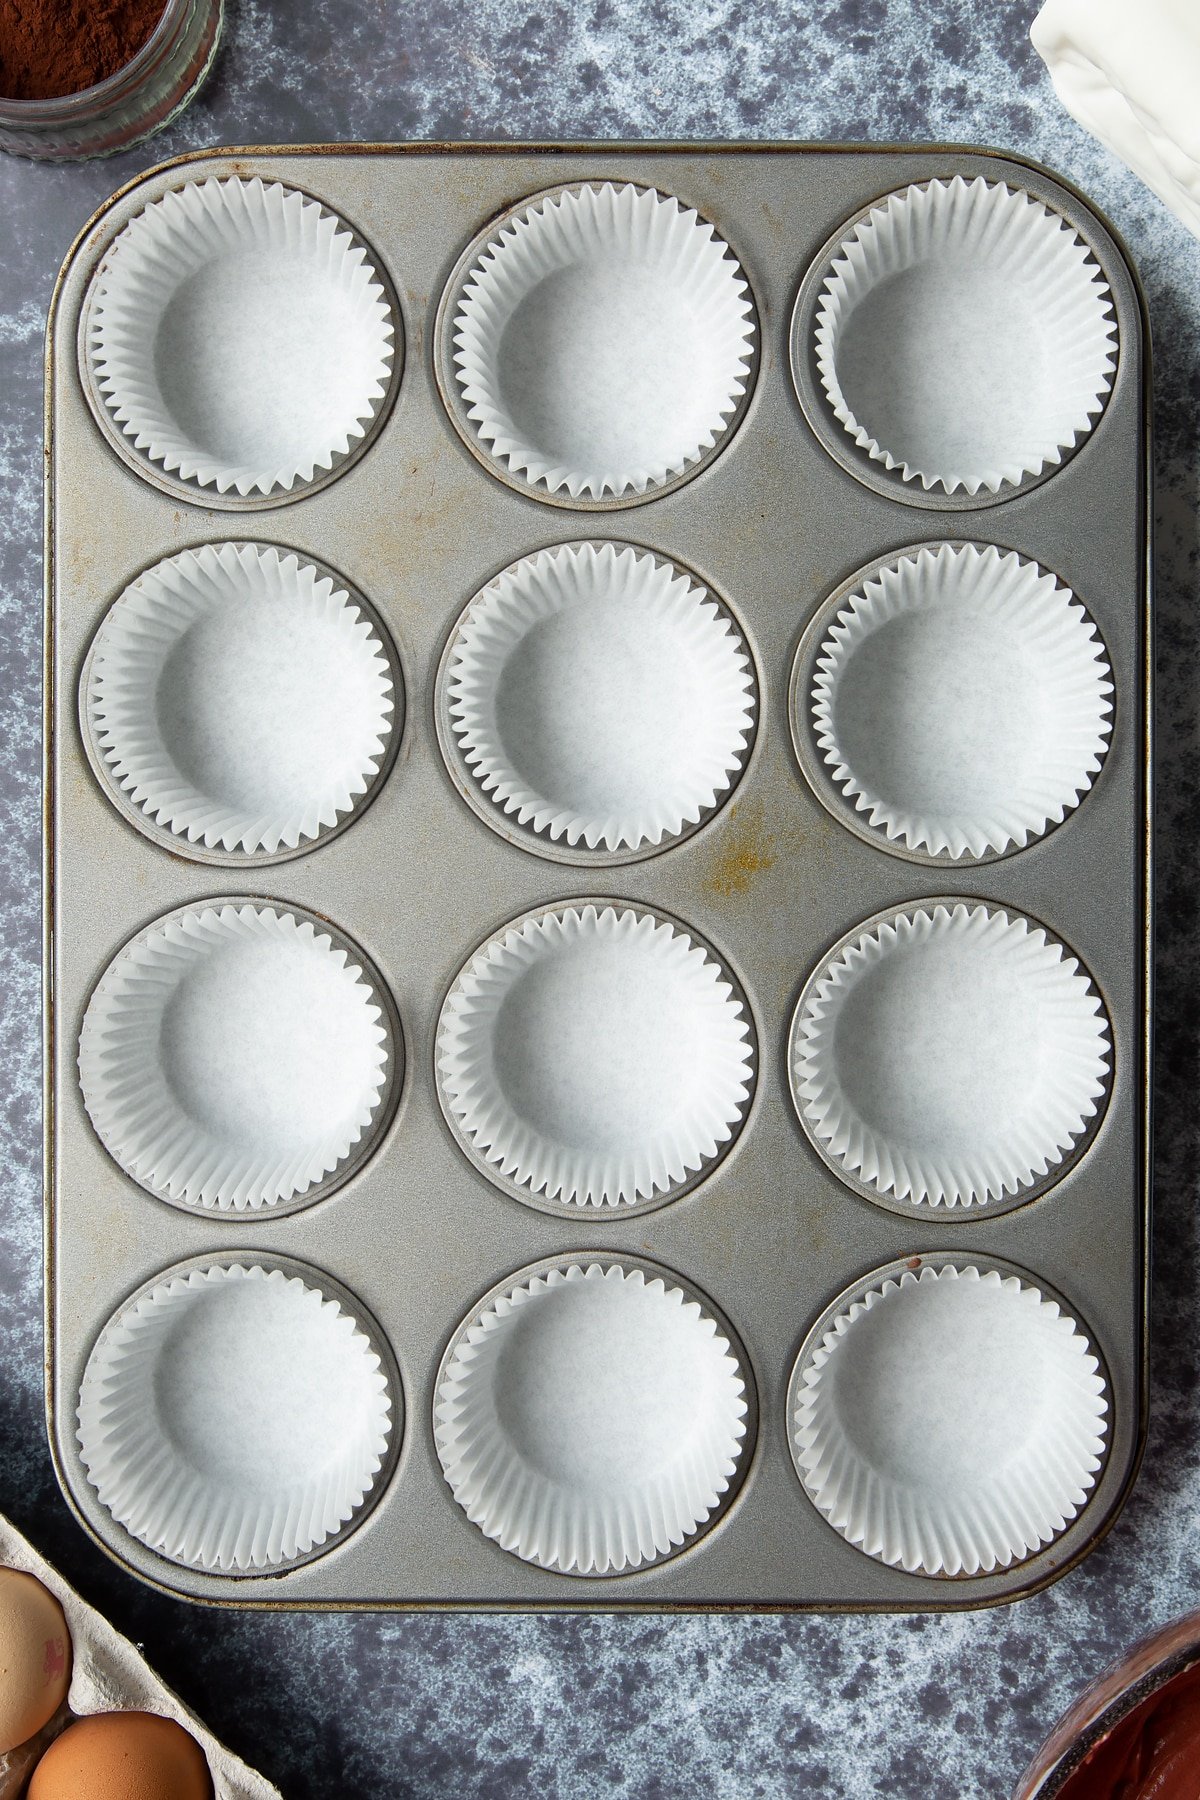 12-hole muffin tray lined with cupcake cases. Ingredients to make dairy free Halloween cupcakes surround the tray.